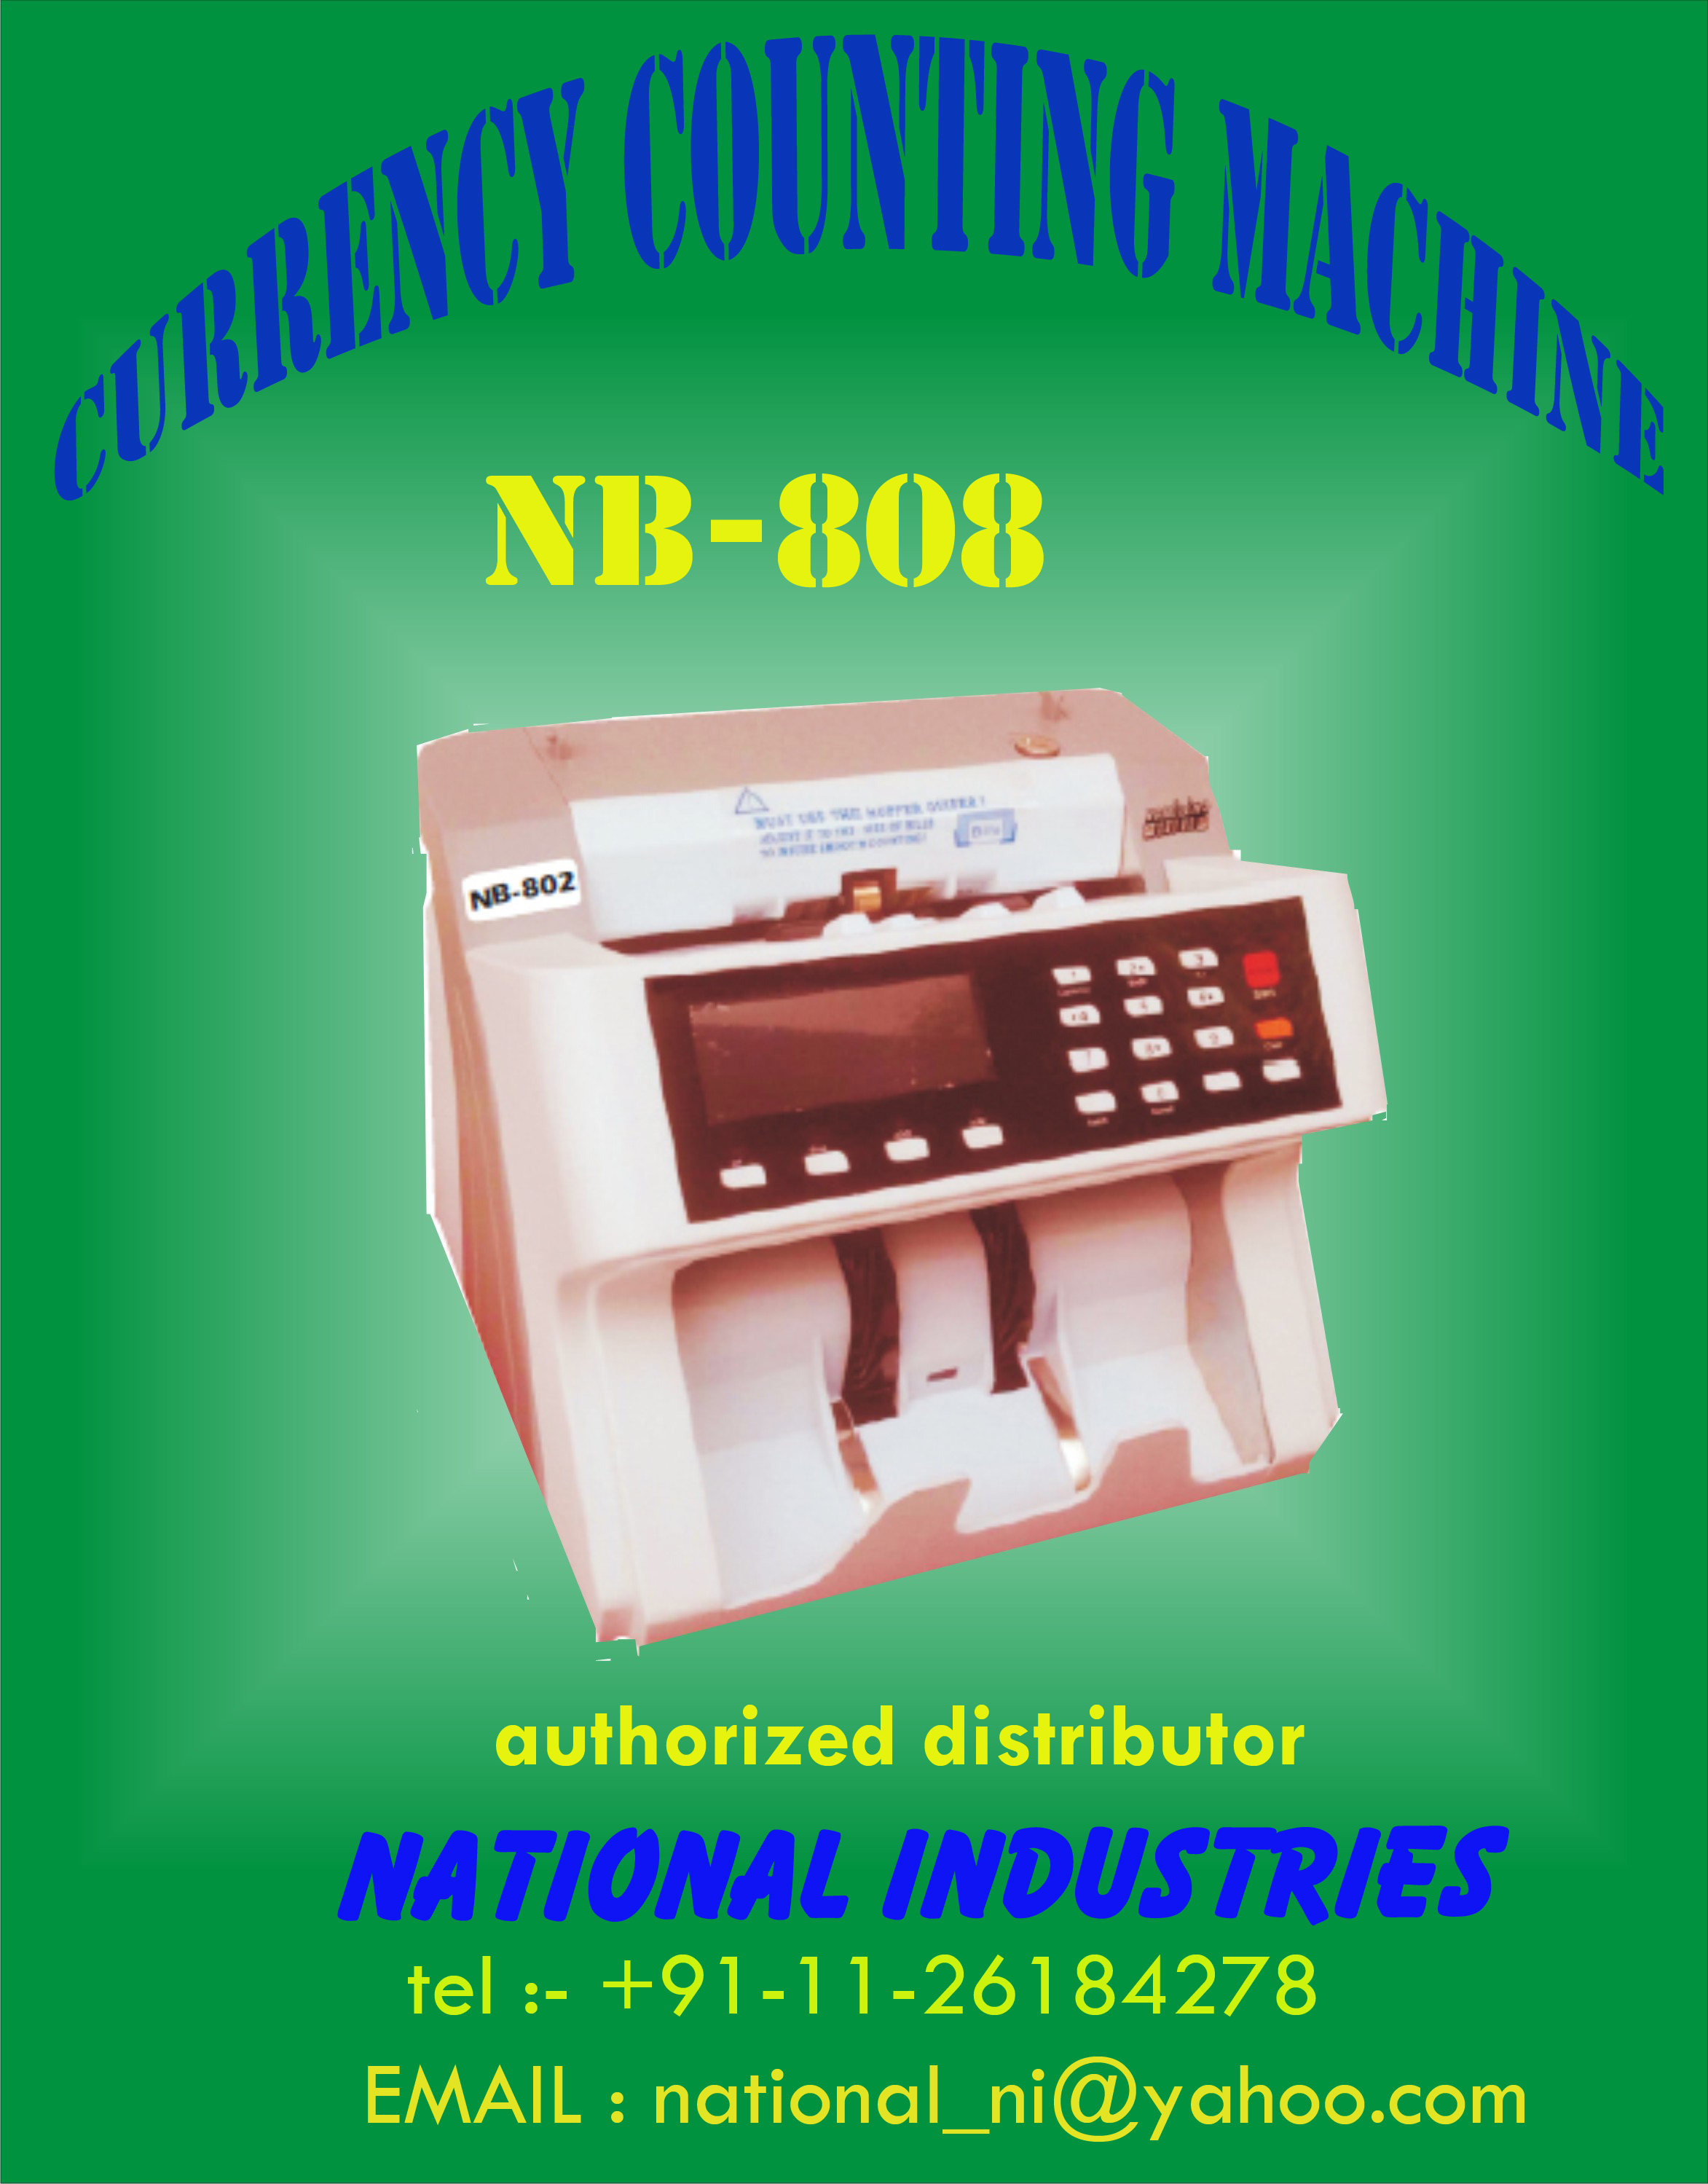 NB-808 currency counting machine with fake note detectorMachines EquipmentsIndustrial MachineryGurgaonIFFCO Chowk